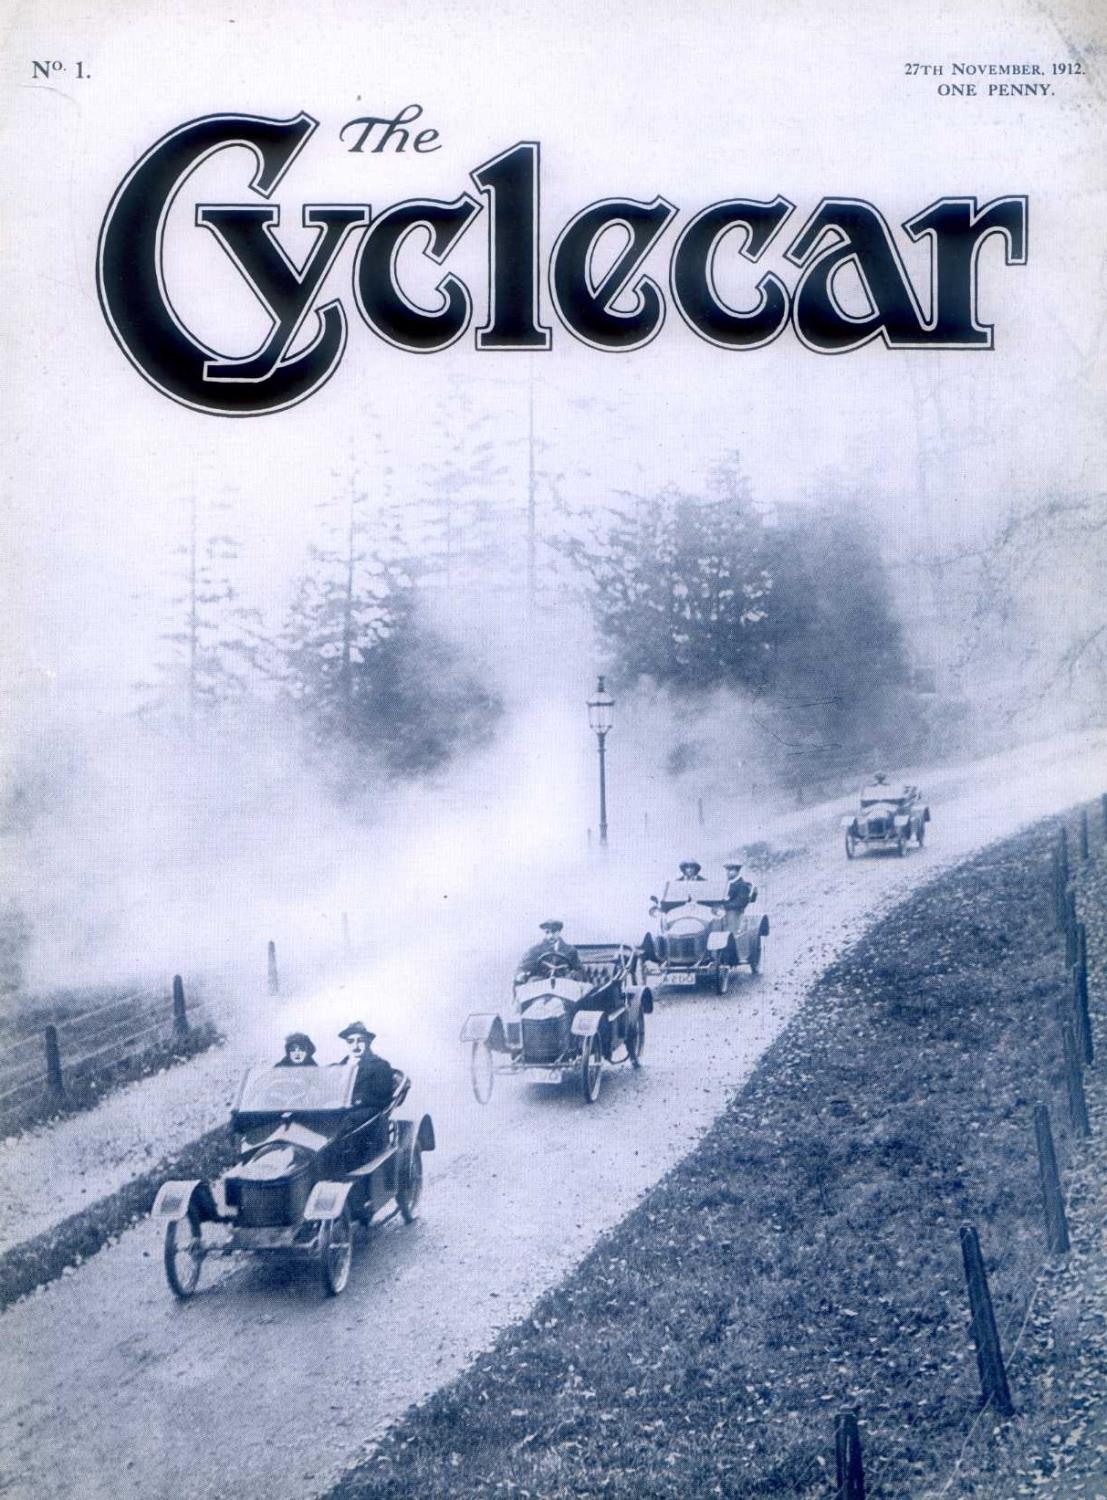 The Cyclecar. A rare pre-production promotional folder, itself containing an example front cover - Image 2 of 2